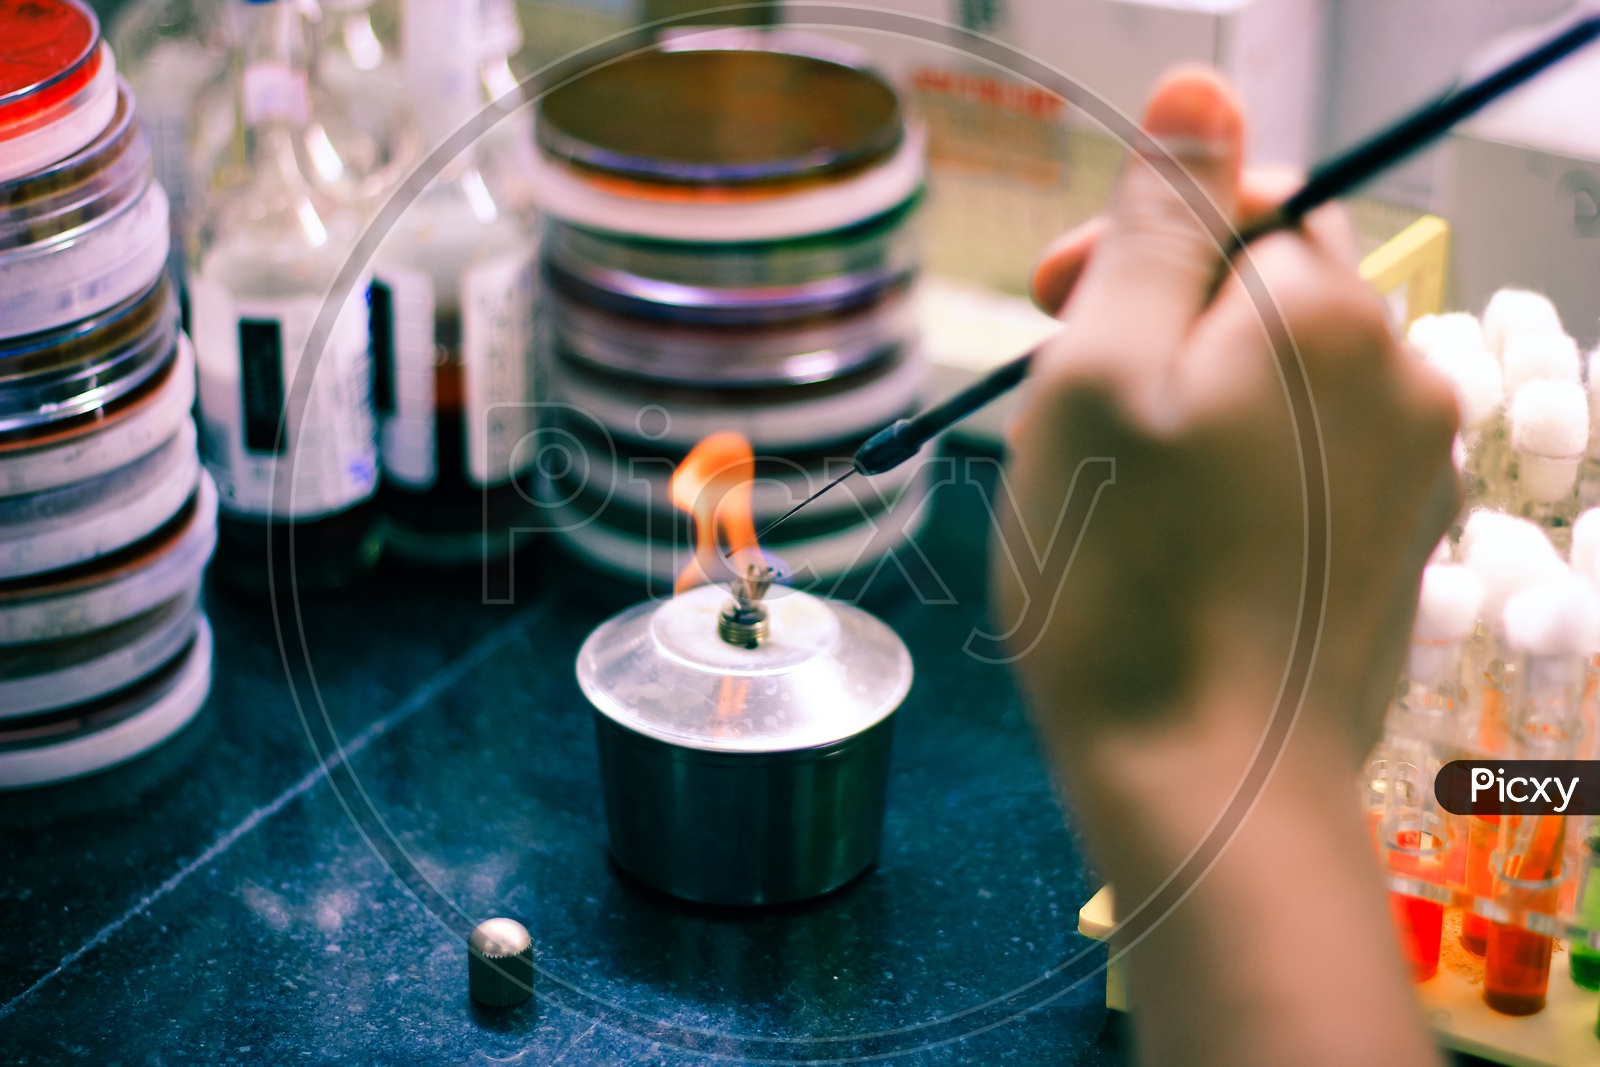 Microbiological Inoculation Loop Being Heated In A Spirit Lamp Flame For Sterilization Disinfection In A Microbiology Laboratory